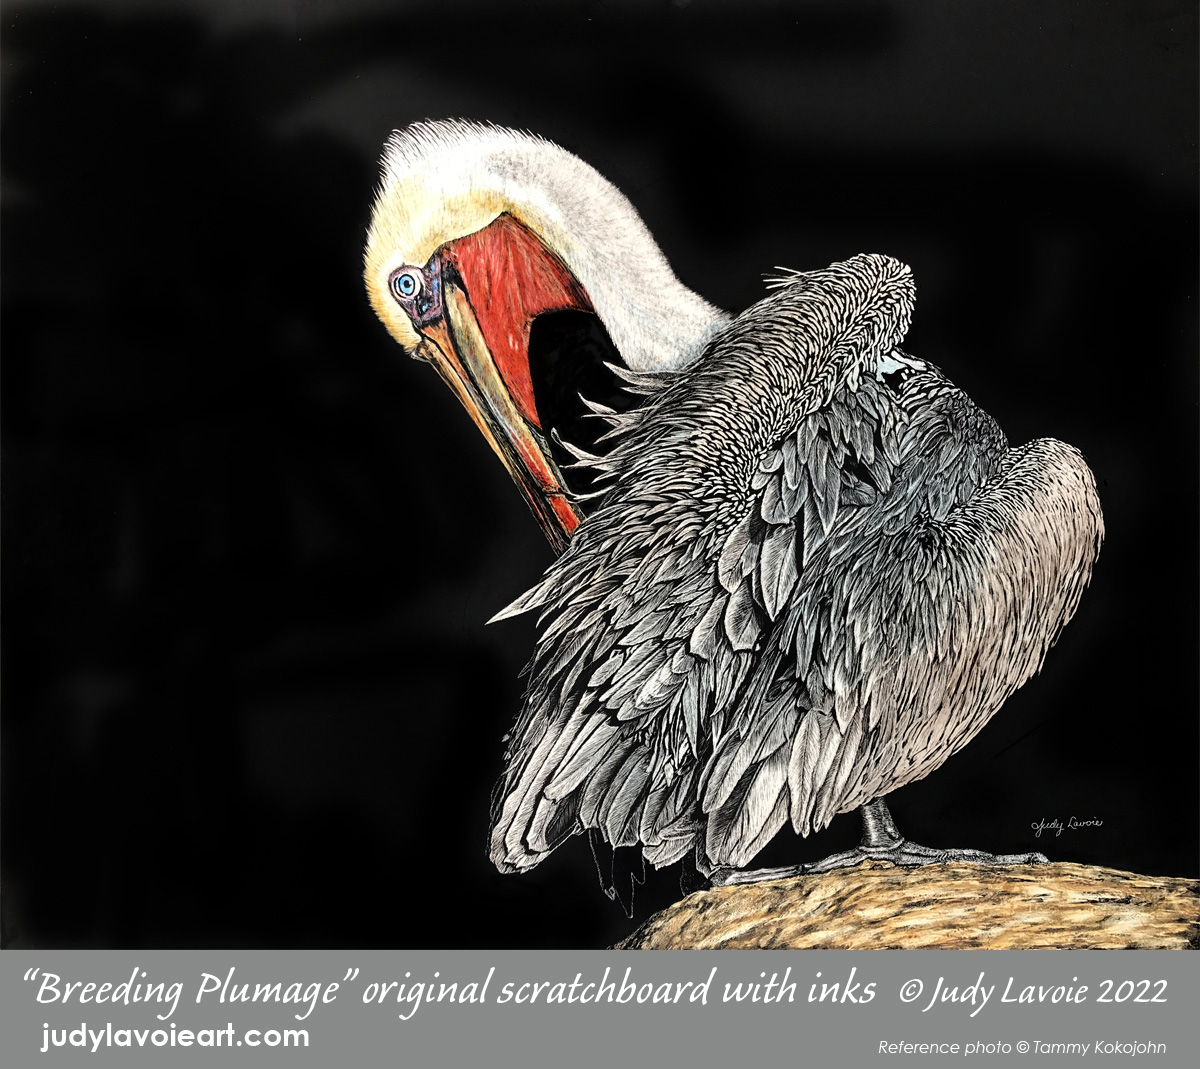 "Breeding Plumage" original scratchboard with inks © Judy Lavoie